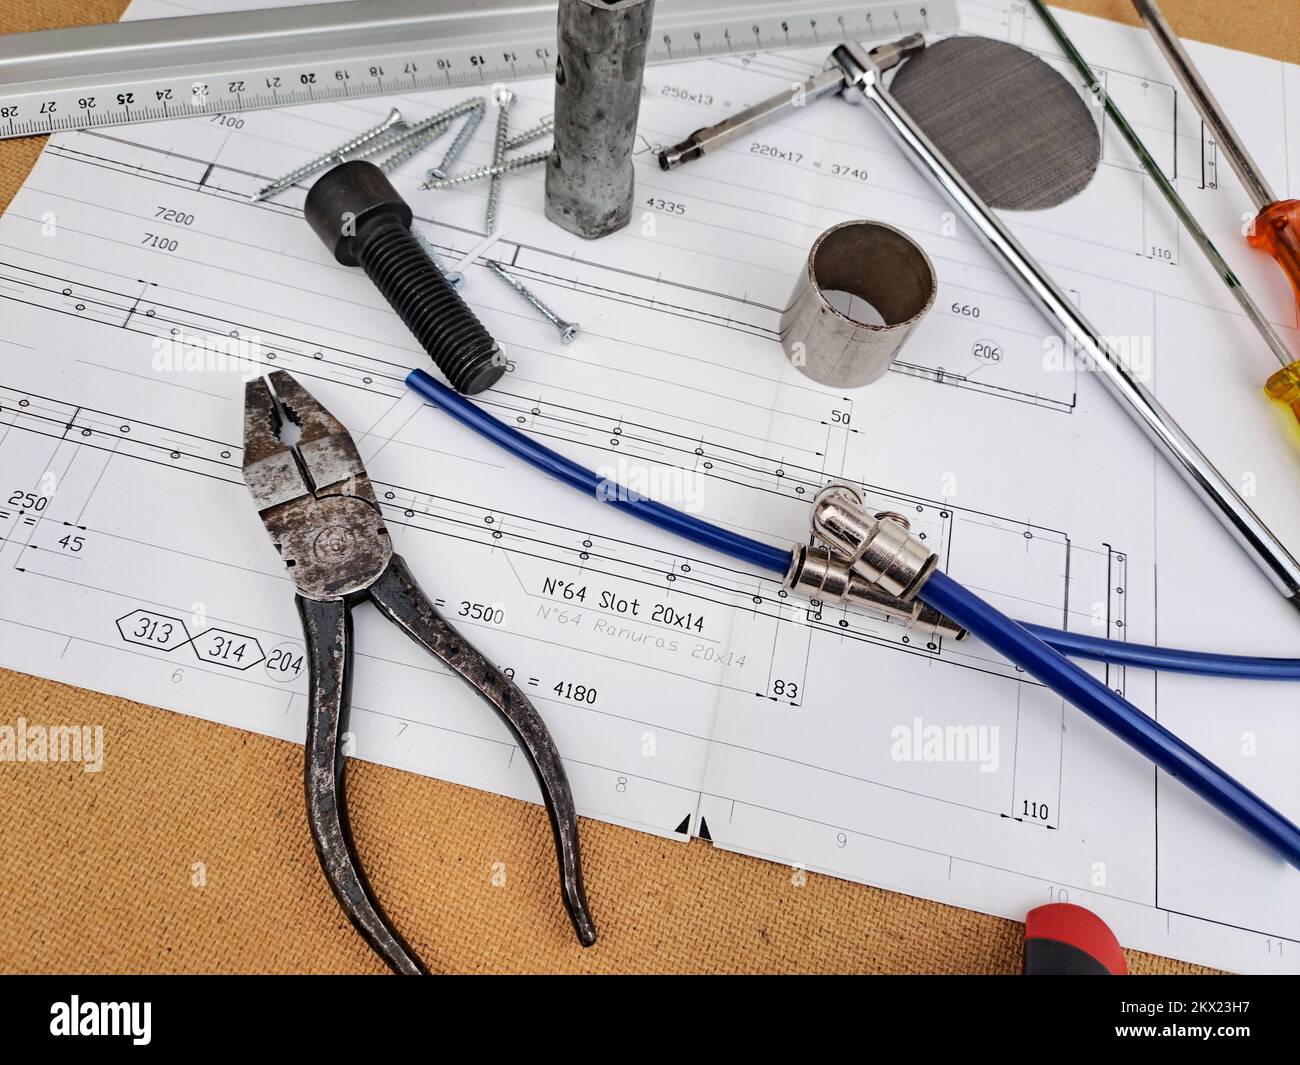 Close-Up Artistic View of Tools in Industrial Setting. No people are visible. Stock Photo